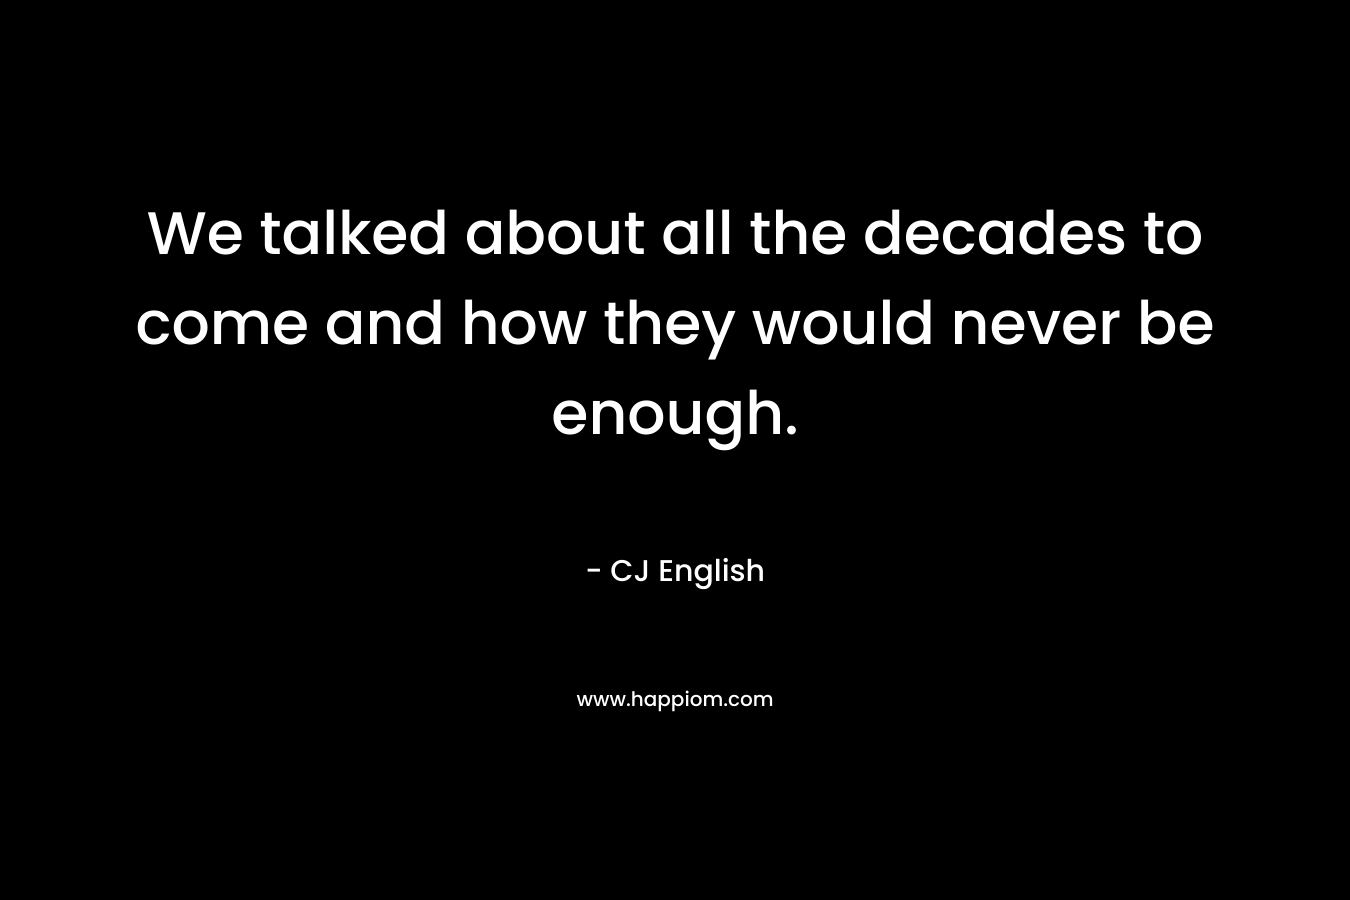 We talked about all the decades to come and how they would never be enough. – CJ English